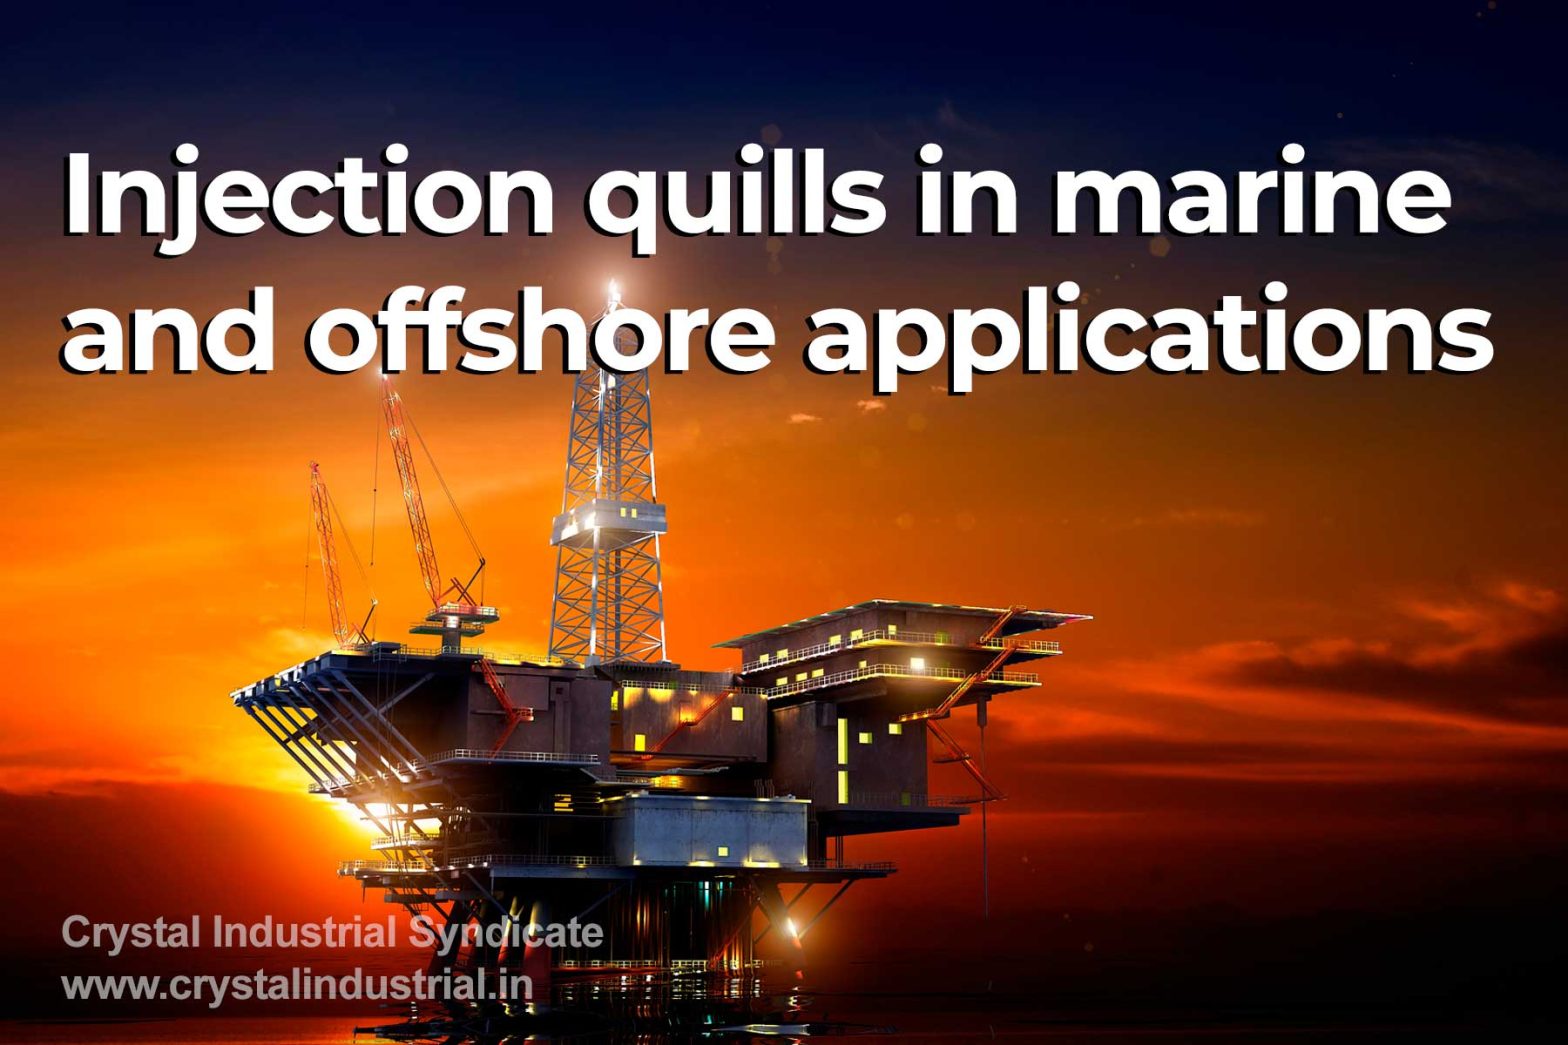 Injection quills improve process efficiency and enhance worker safety in marine and offshore applications